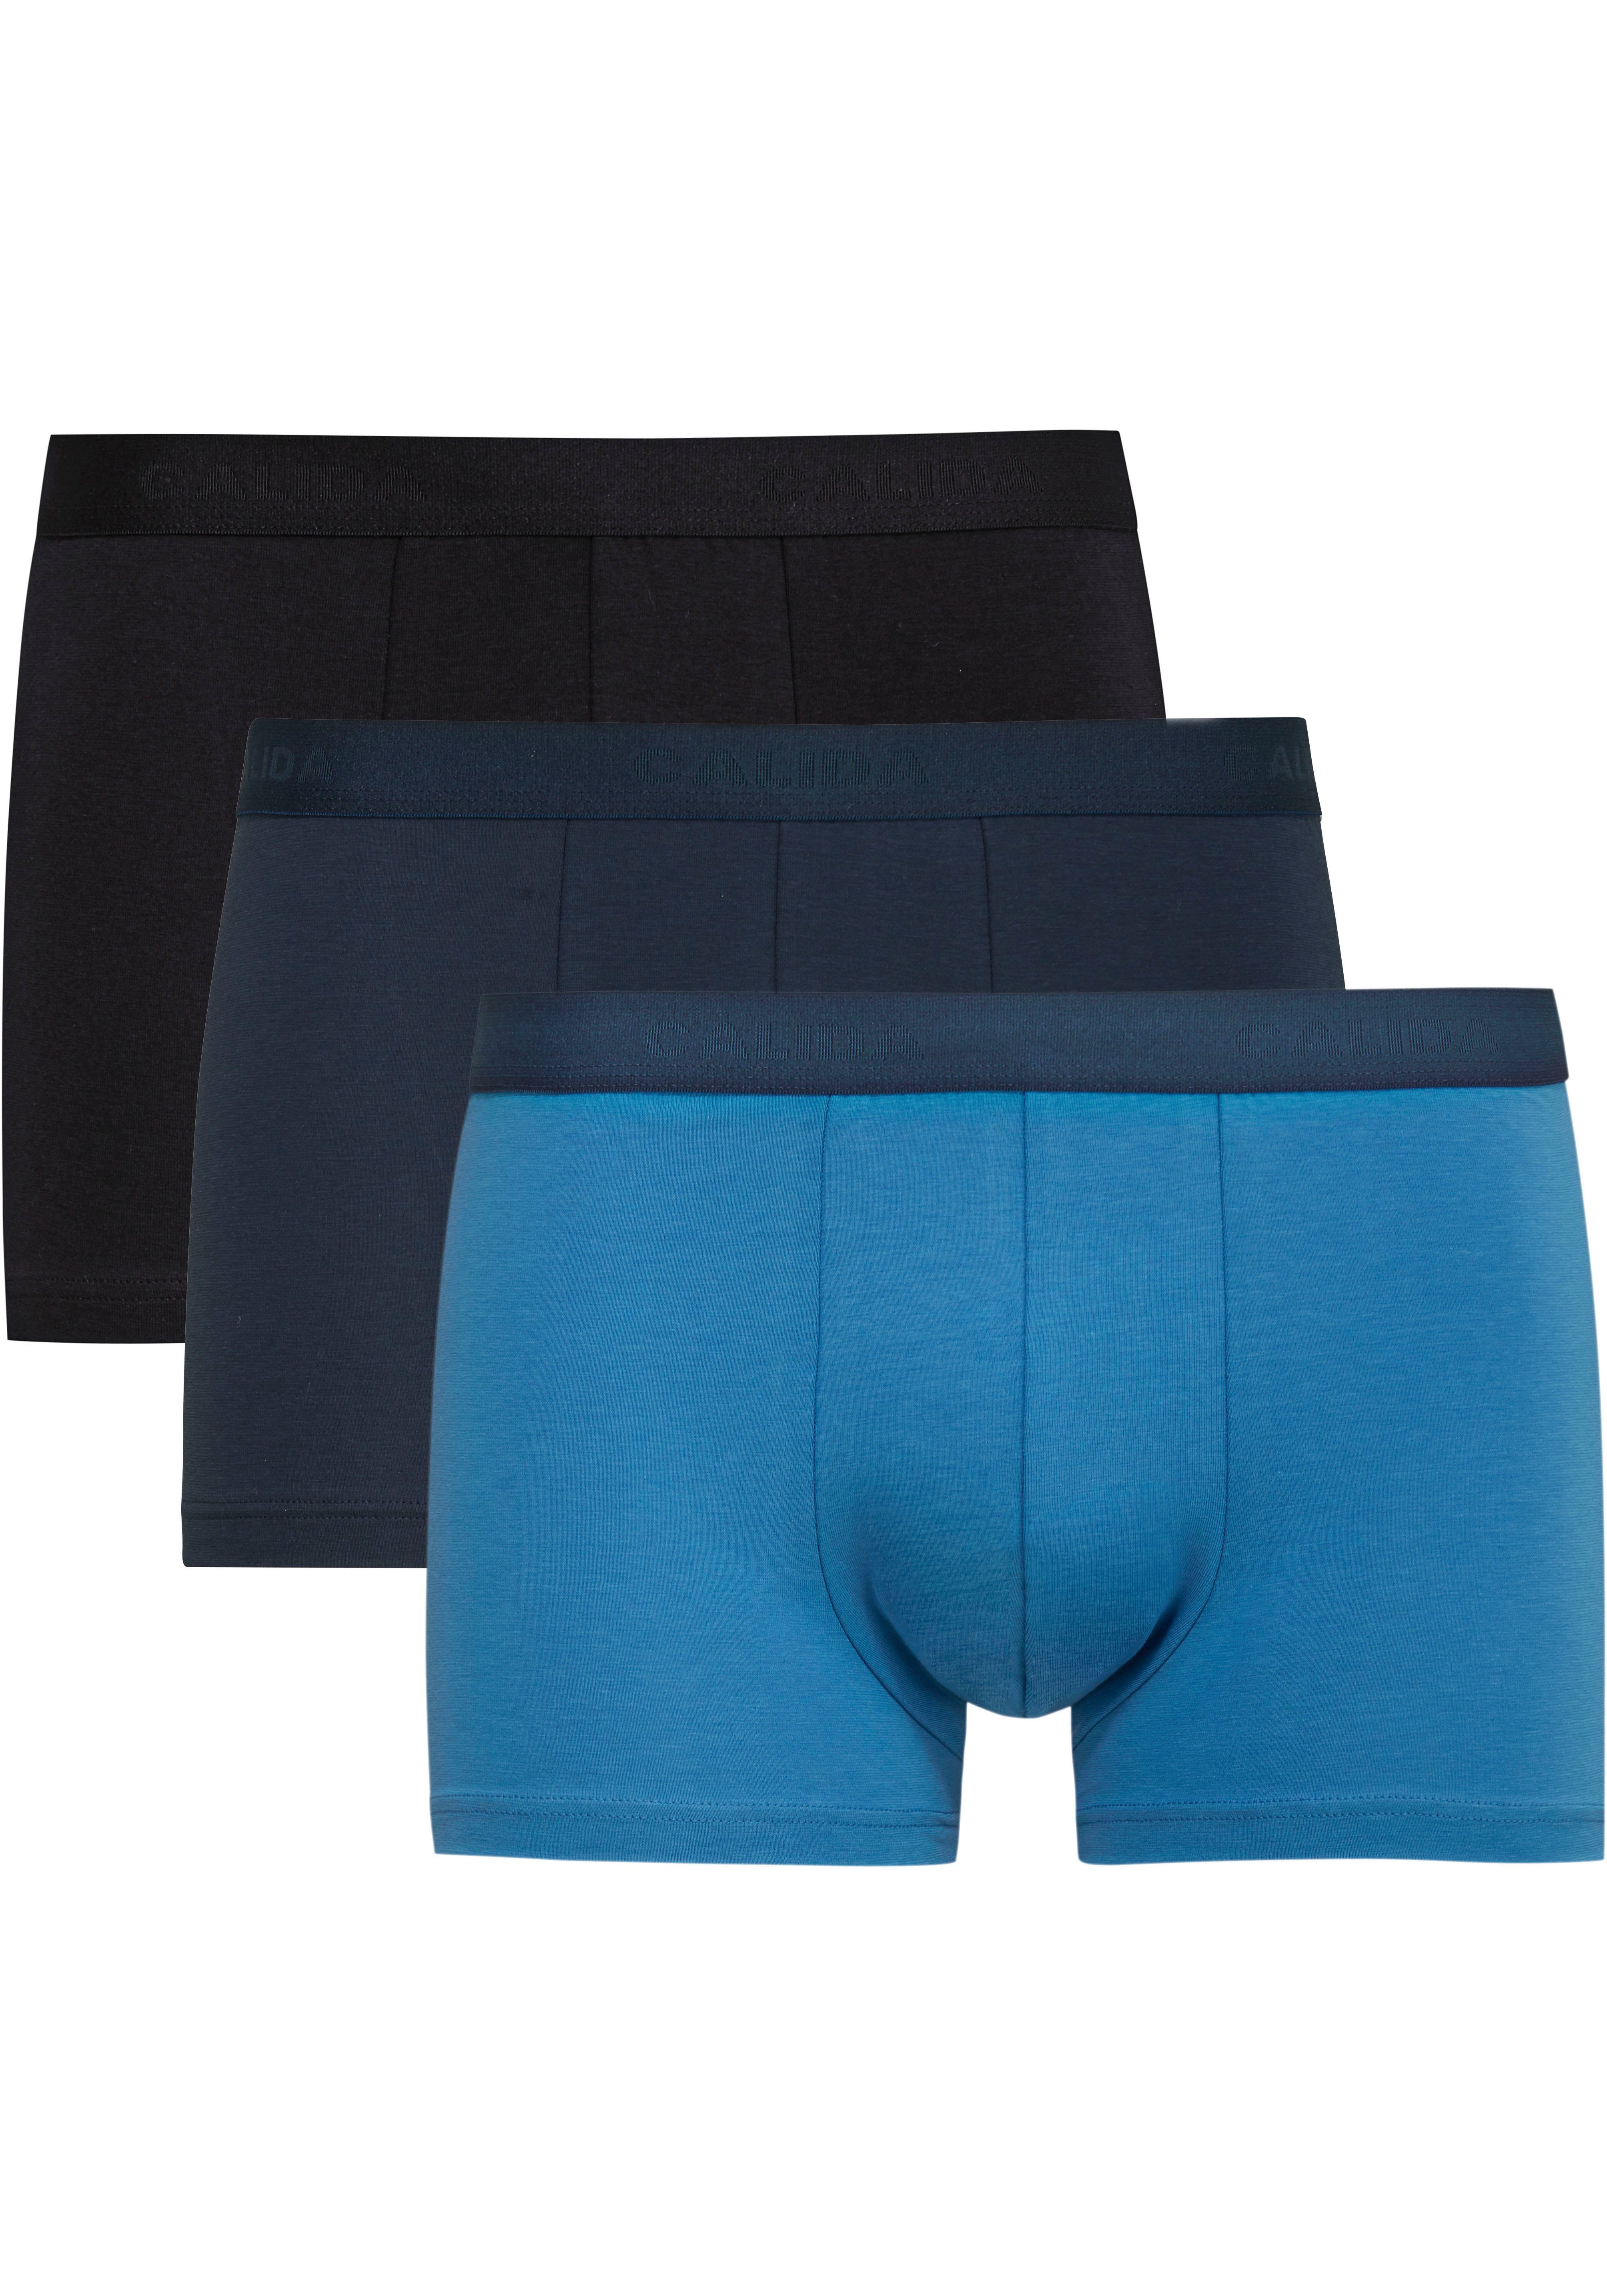 CALIDA Boxershorts Natural Benefit (Packung, Boxer-Brief Jersey-Qualität 3-St) formstabile Single mutlicolor